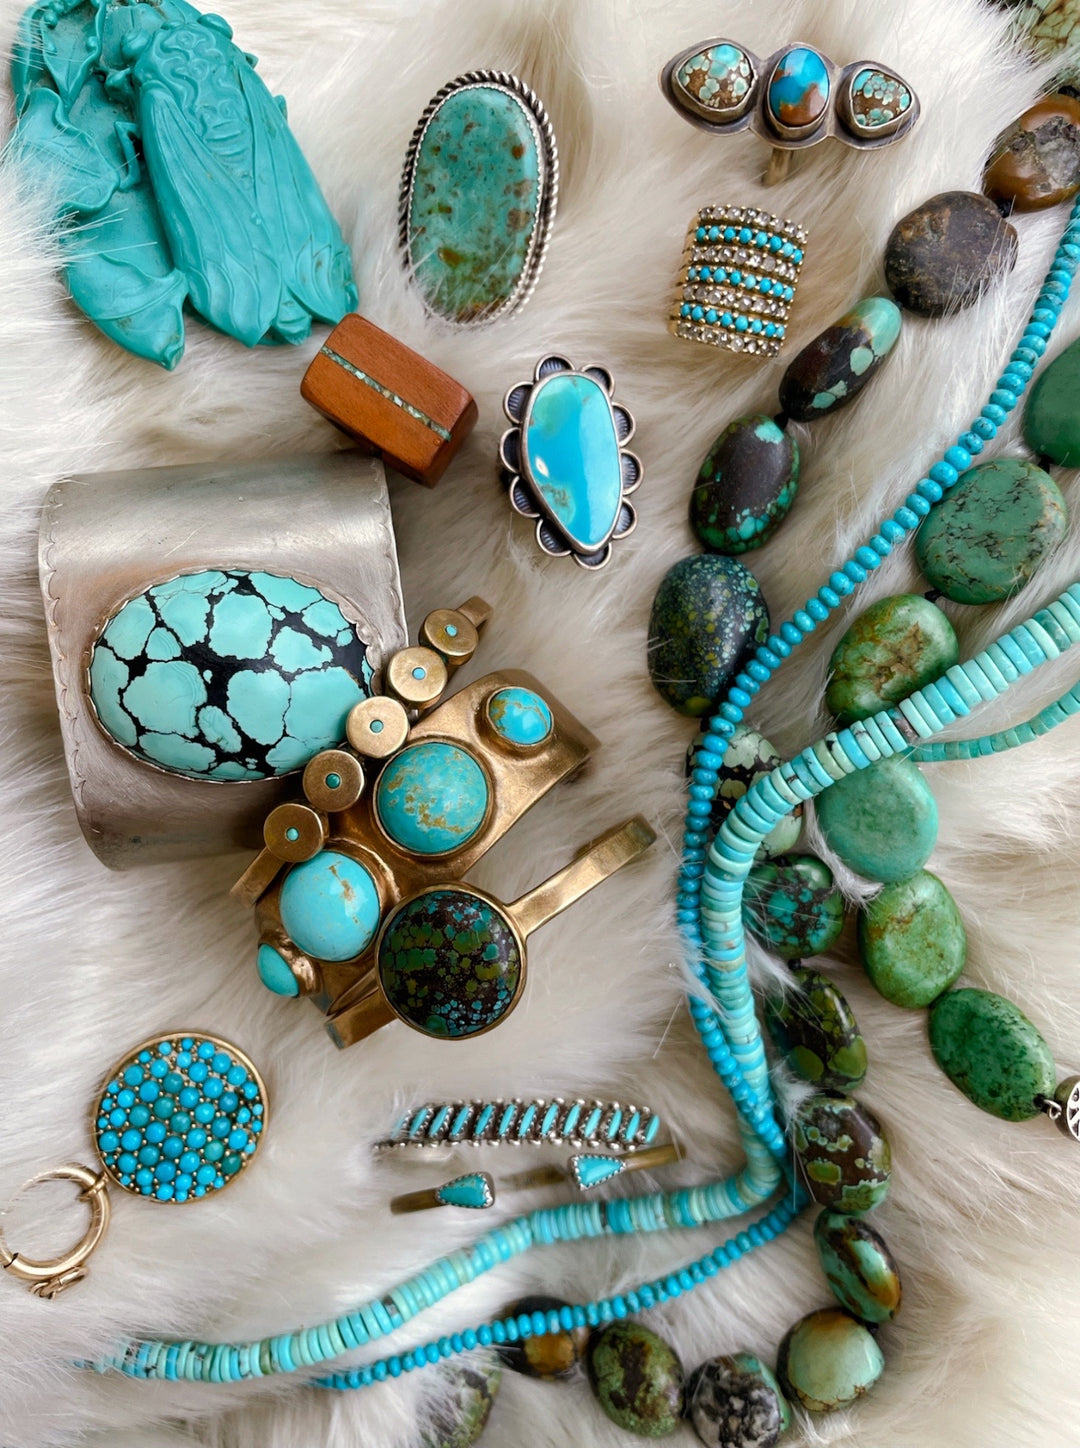 Assorted Turquoise Jewelry in Madeline Ellis' Personal Collection